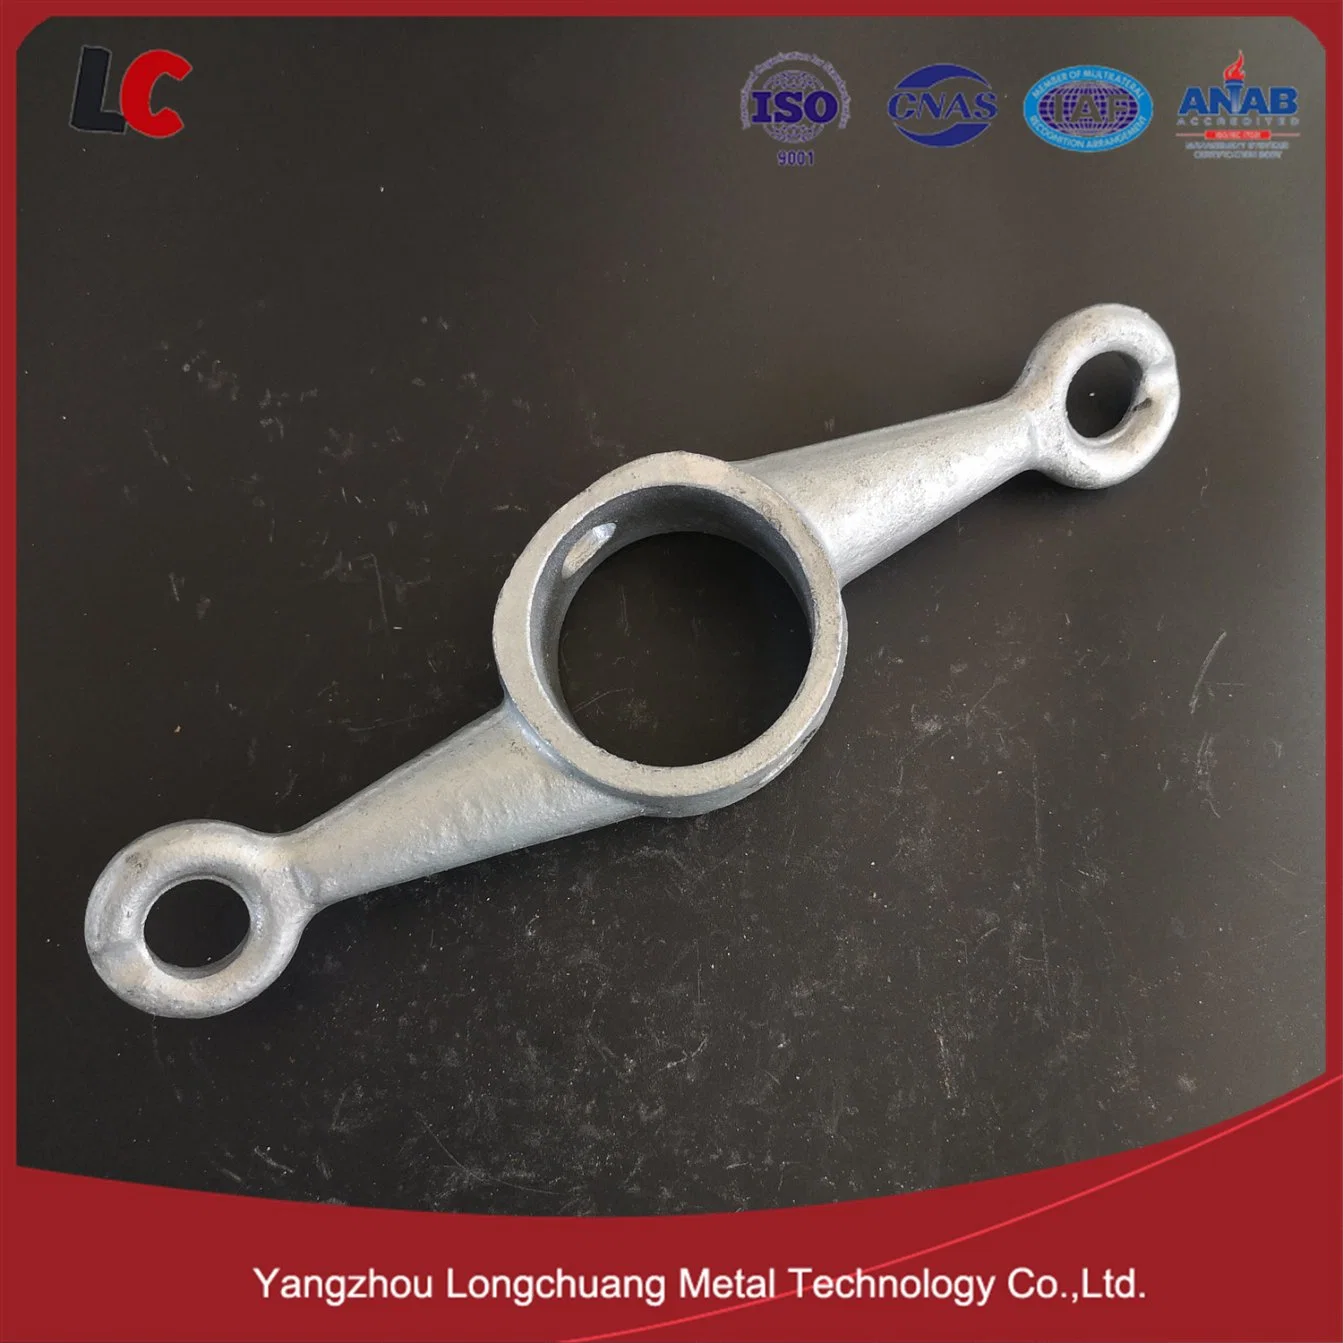 Iron Casting Foundry Sand Iron Casting Products